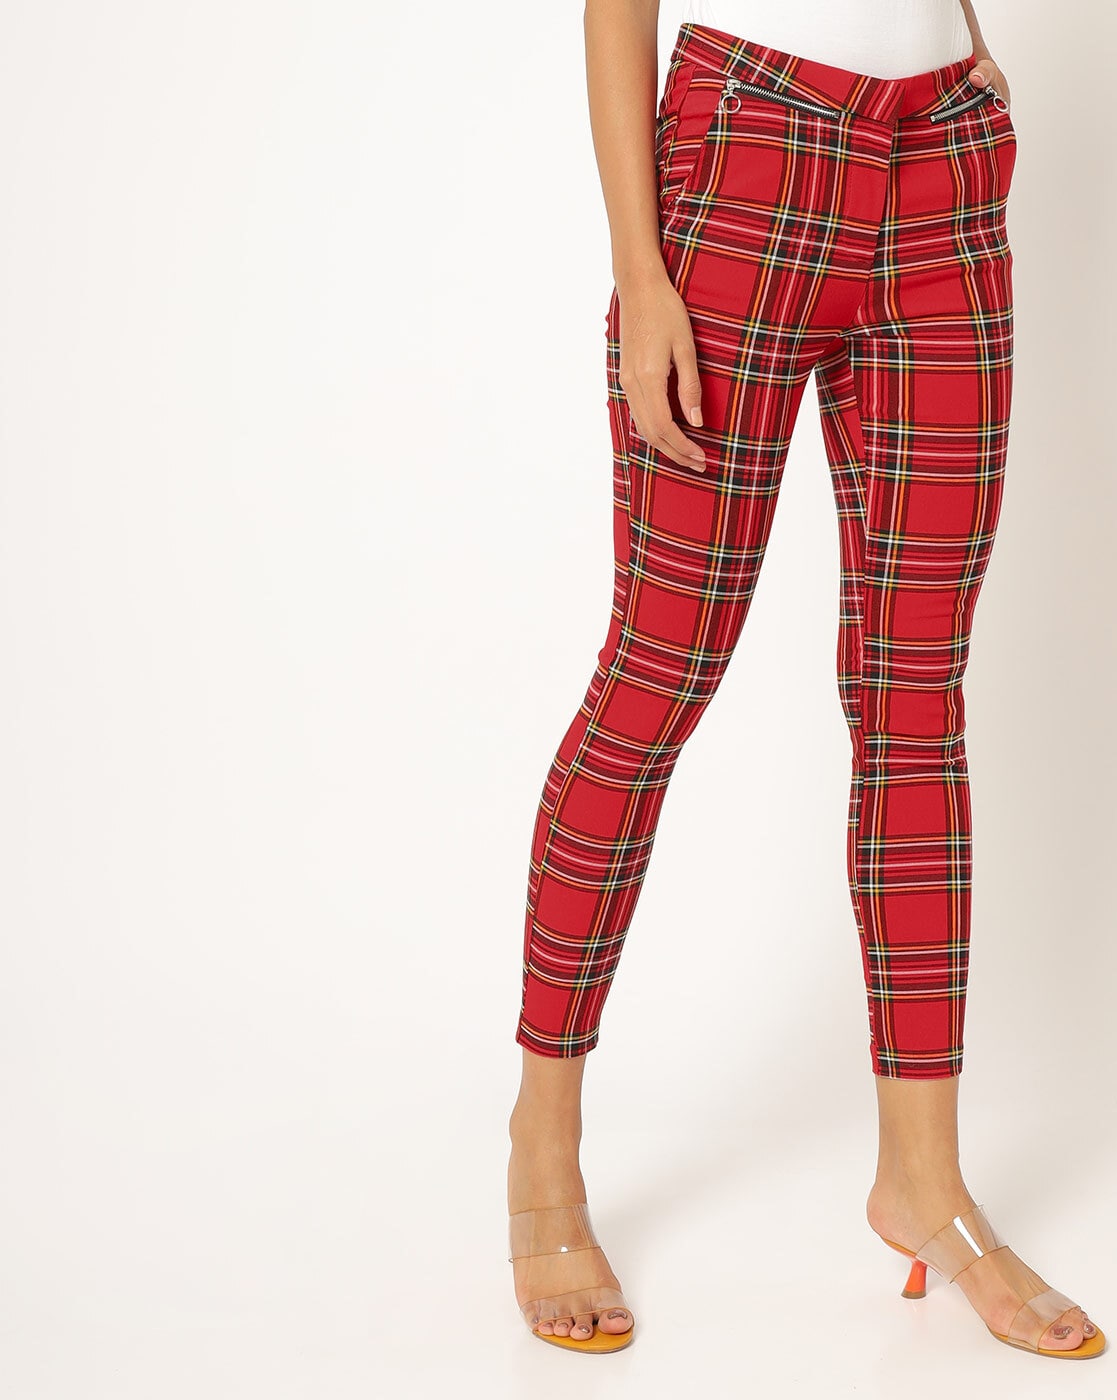 Relco  Red Tartan Sta Press  Trousers  The Modfather Clothing Company